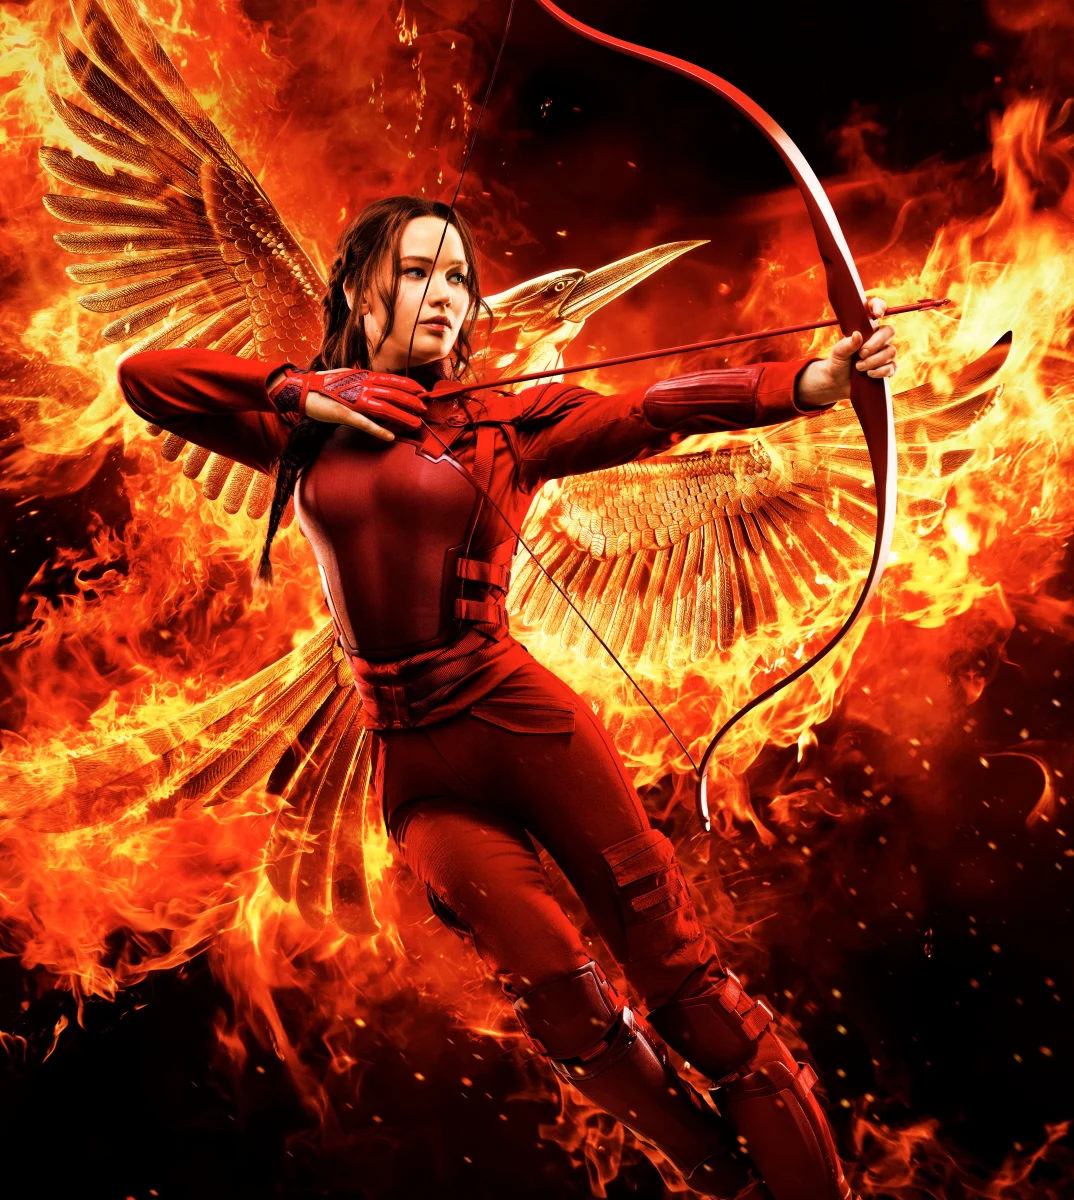 Jennifer Lawrence as Katniss in the Hunger Games. photo courtesy of Flickr